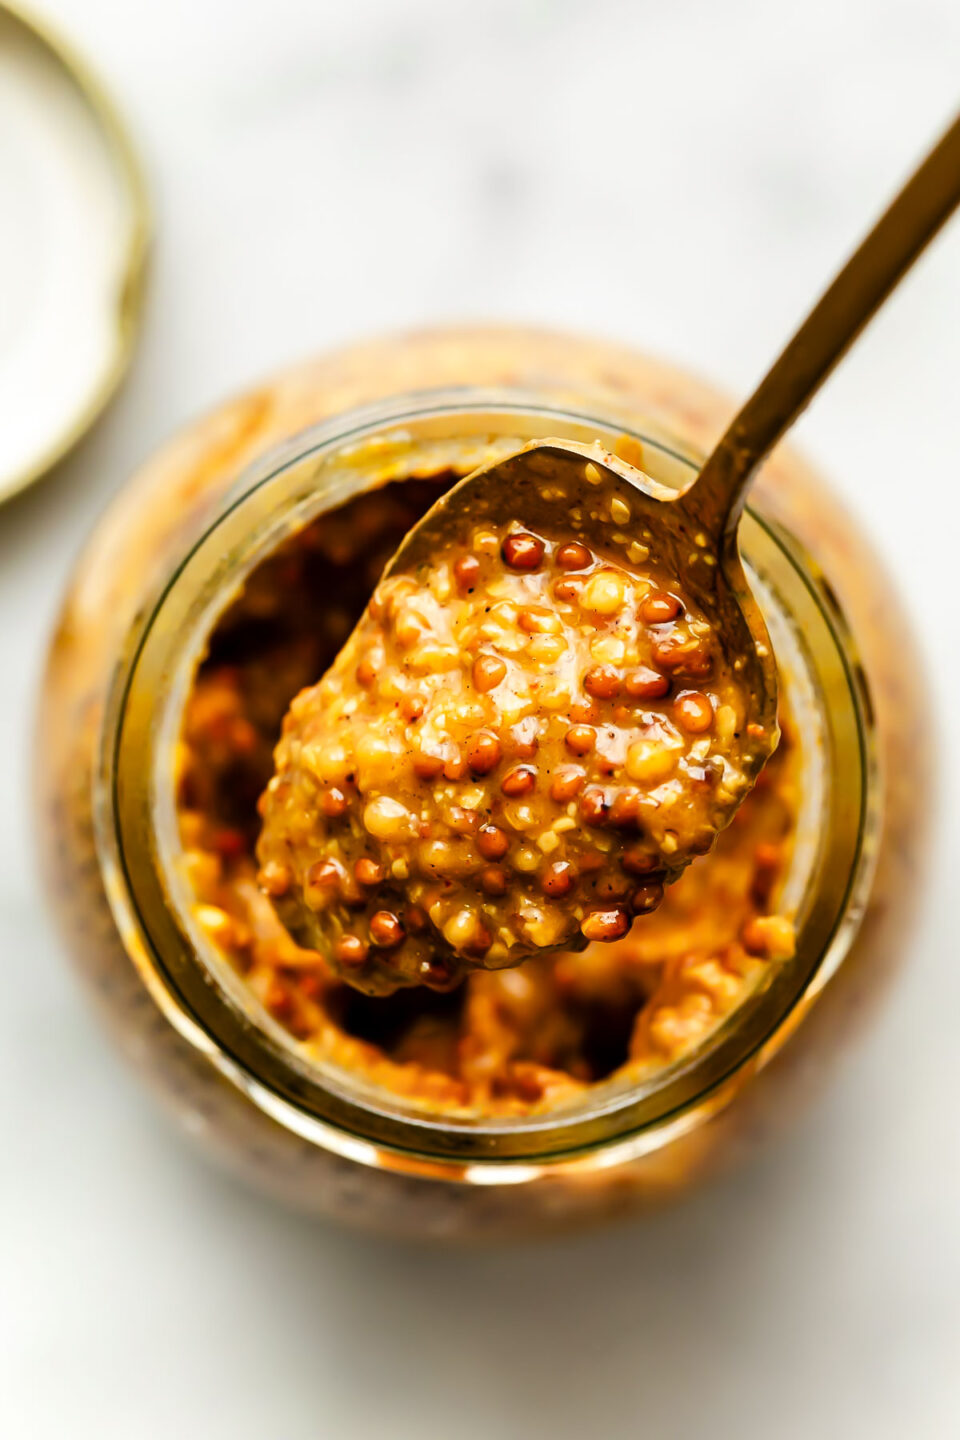 An overhead macro shot of a spoon full of whole grain mustard over a jar on a white marbled surface.